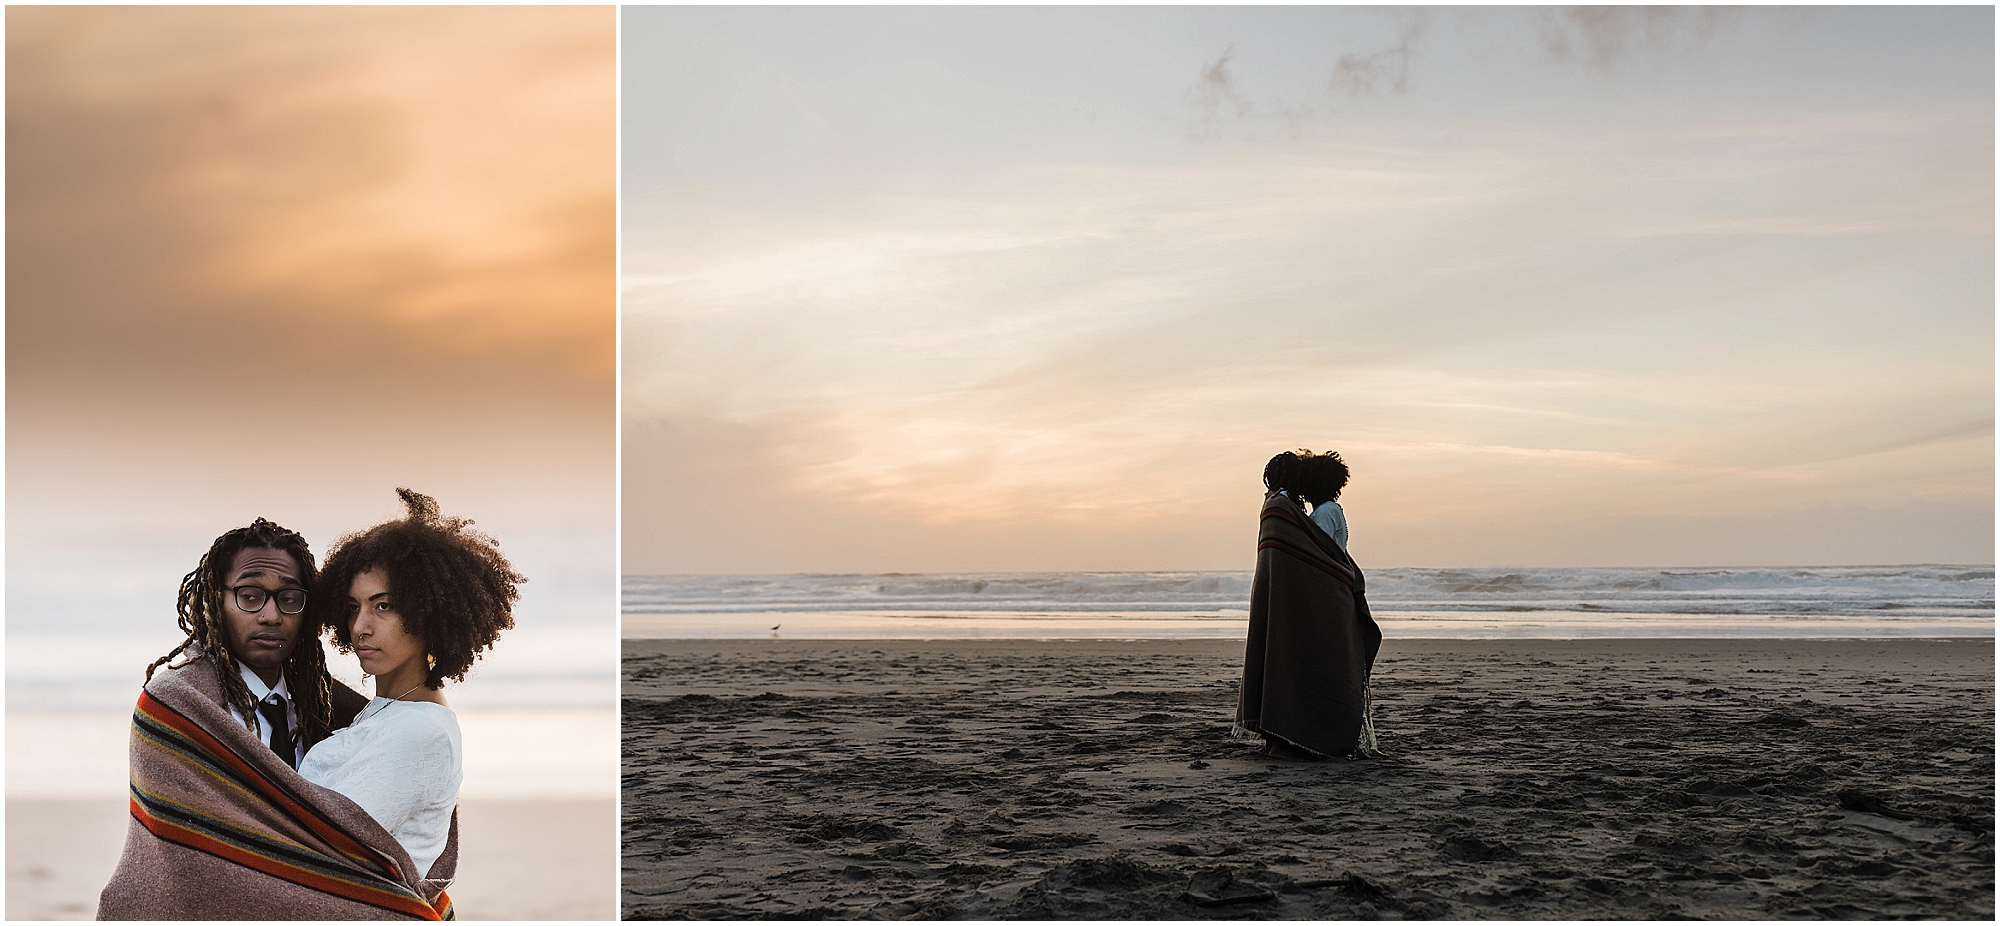 The sun sets over the Pacific Ocean creating a beautiful orange glow as a couple stays warm wrapped in a Pendleton blanket on their Oregon Coast elopement day. | Erica Swantek Photography